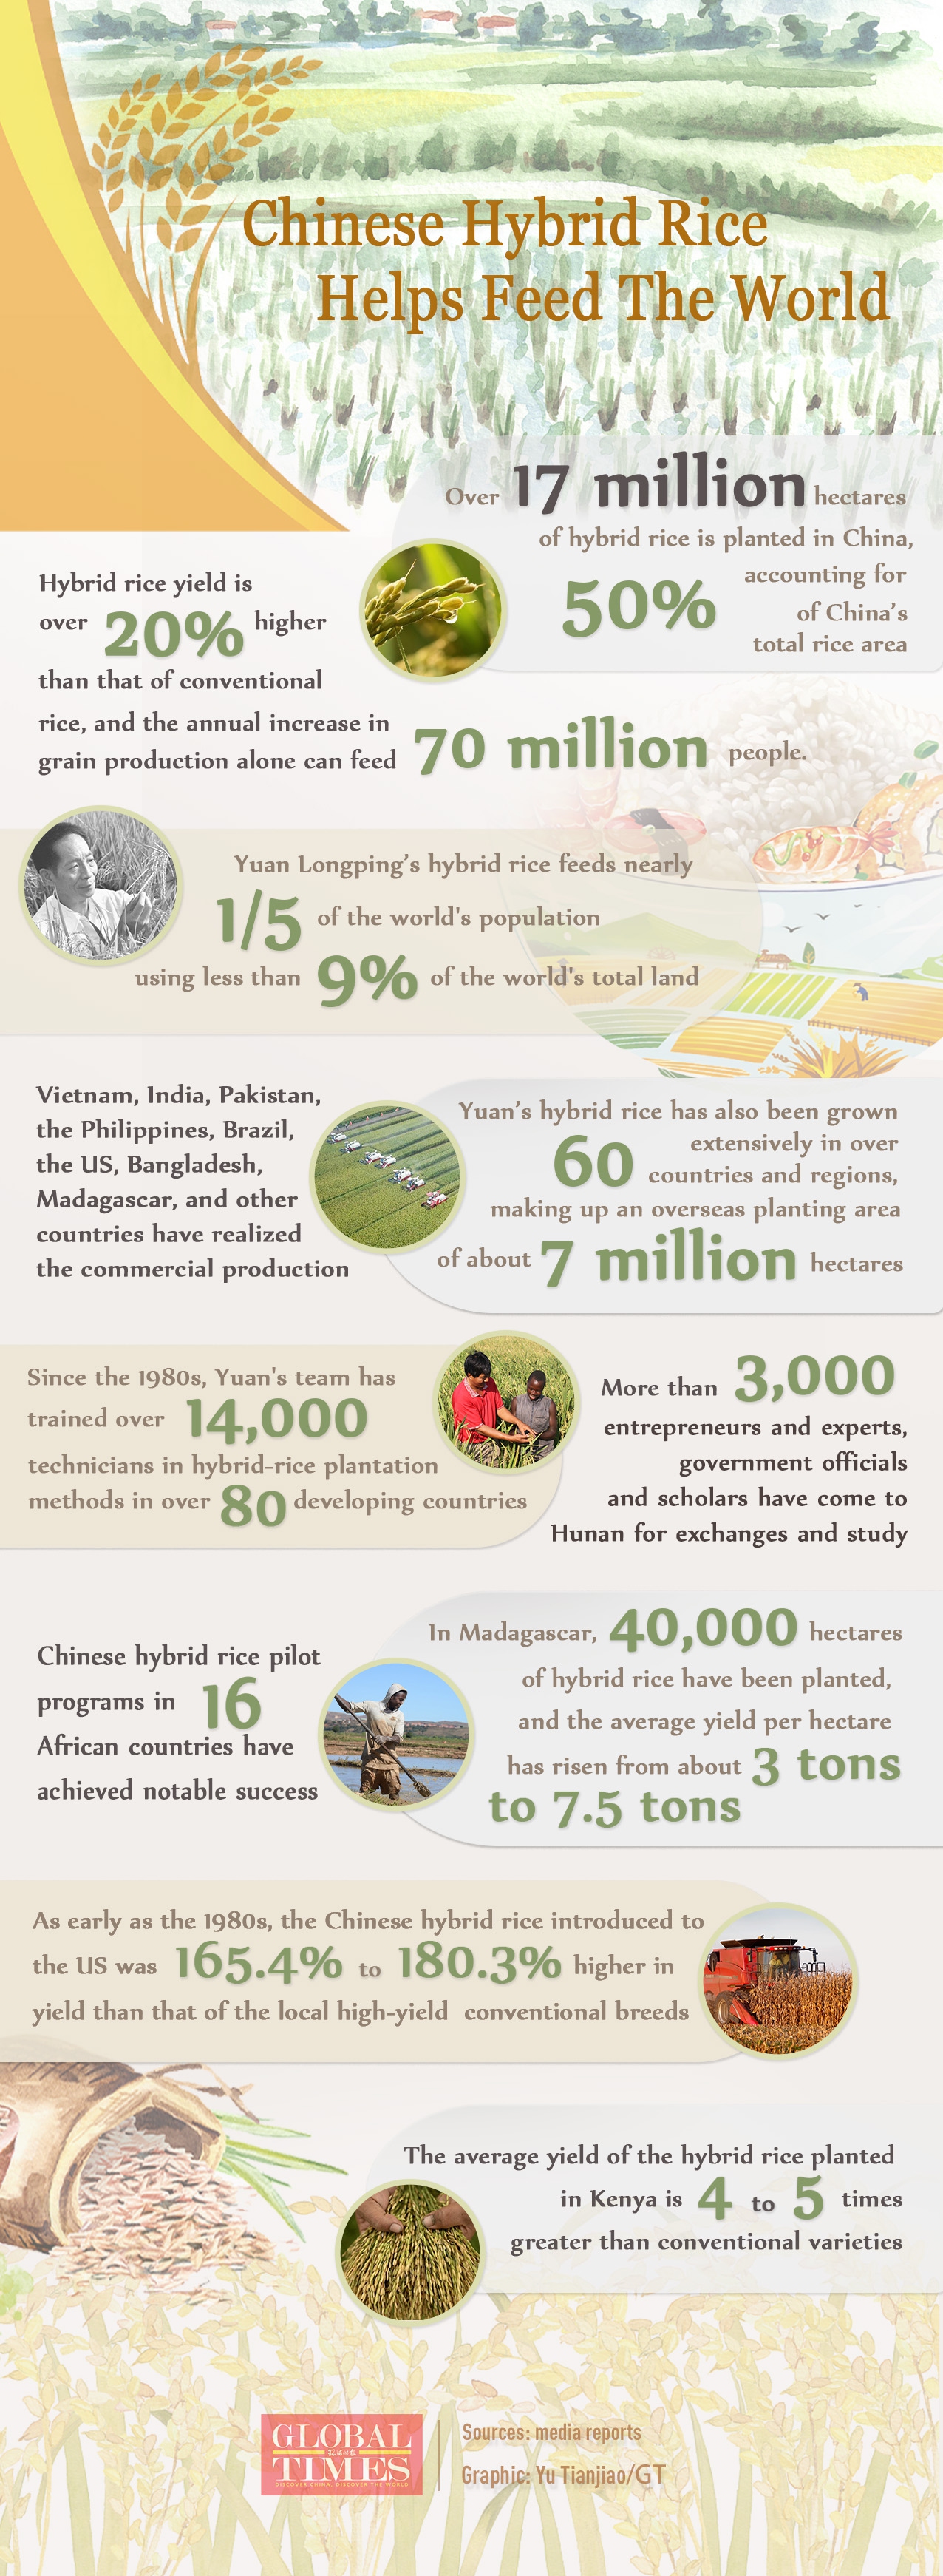 Yuan Longping’s hybrid rice feeds nearly 1/5 of the world's population using less than 9% of the world's total land.And helped feeding the world's population. Chinese hybrid rice has also been grown extensively in over 60 countries and regions, making up an overseas planting area of about 7 million hectares.